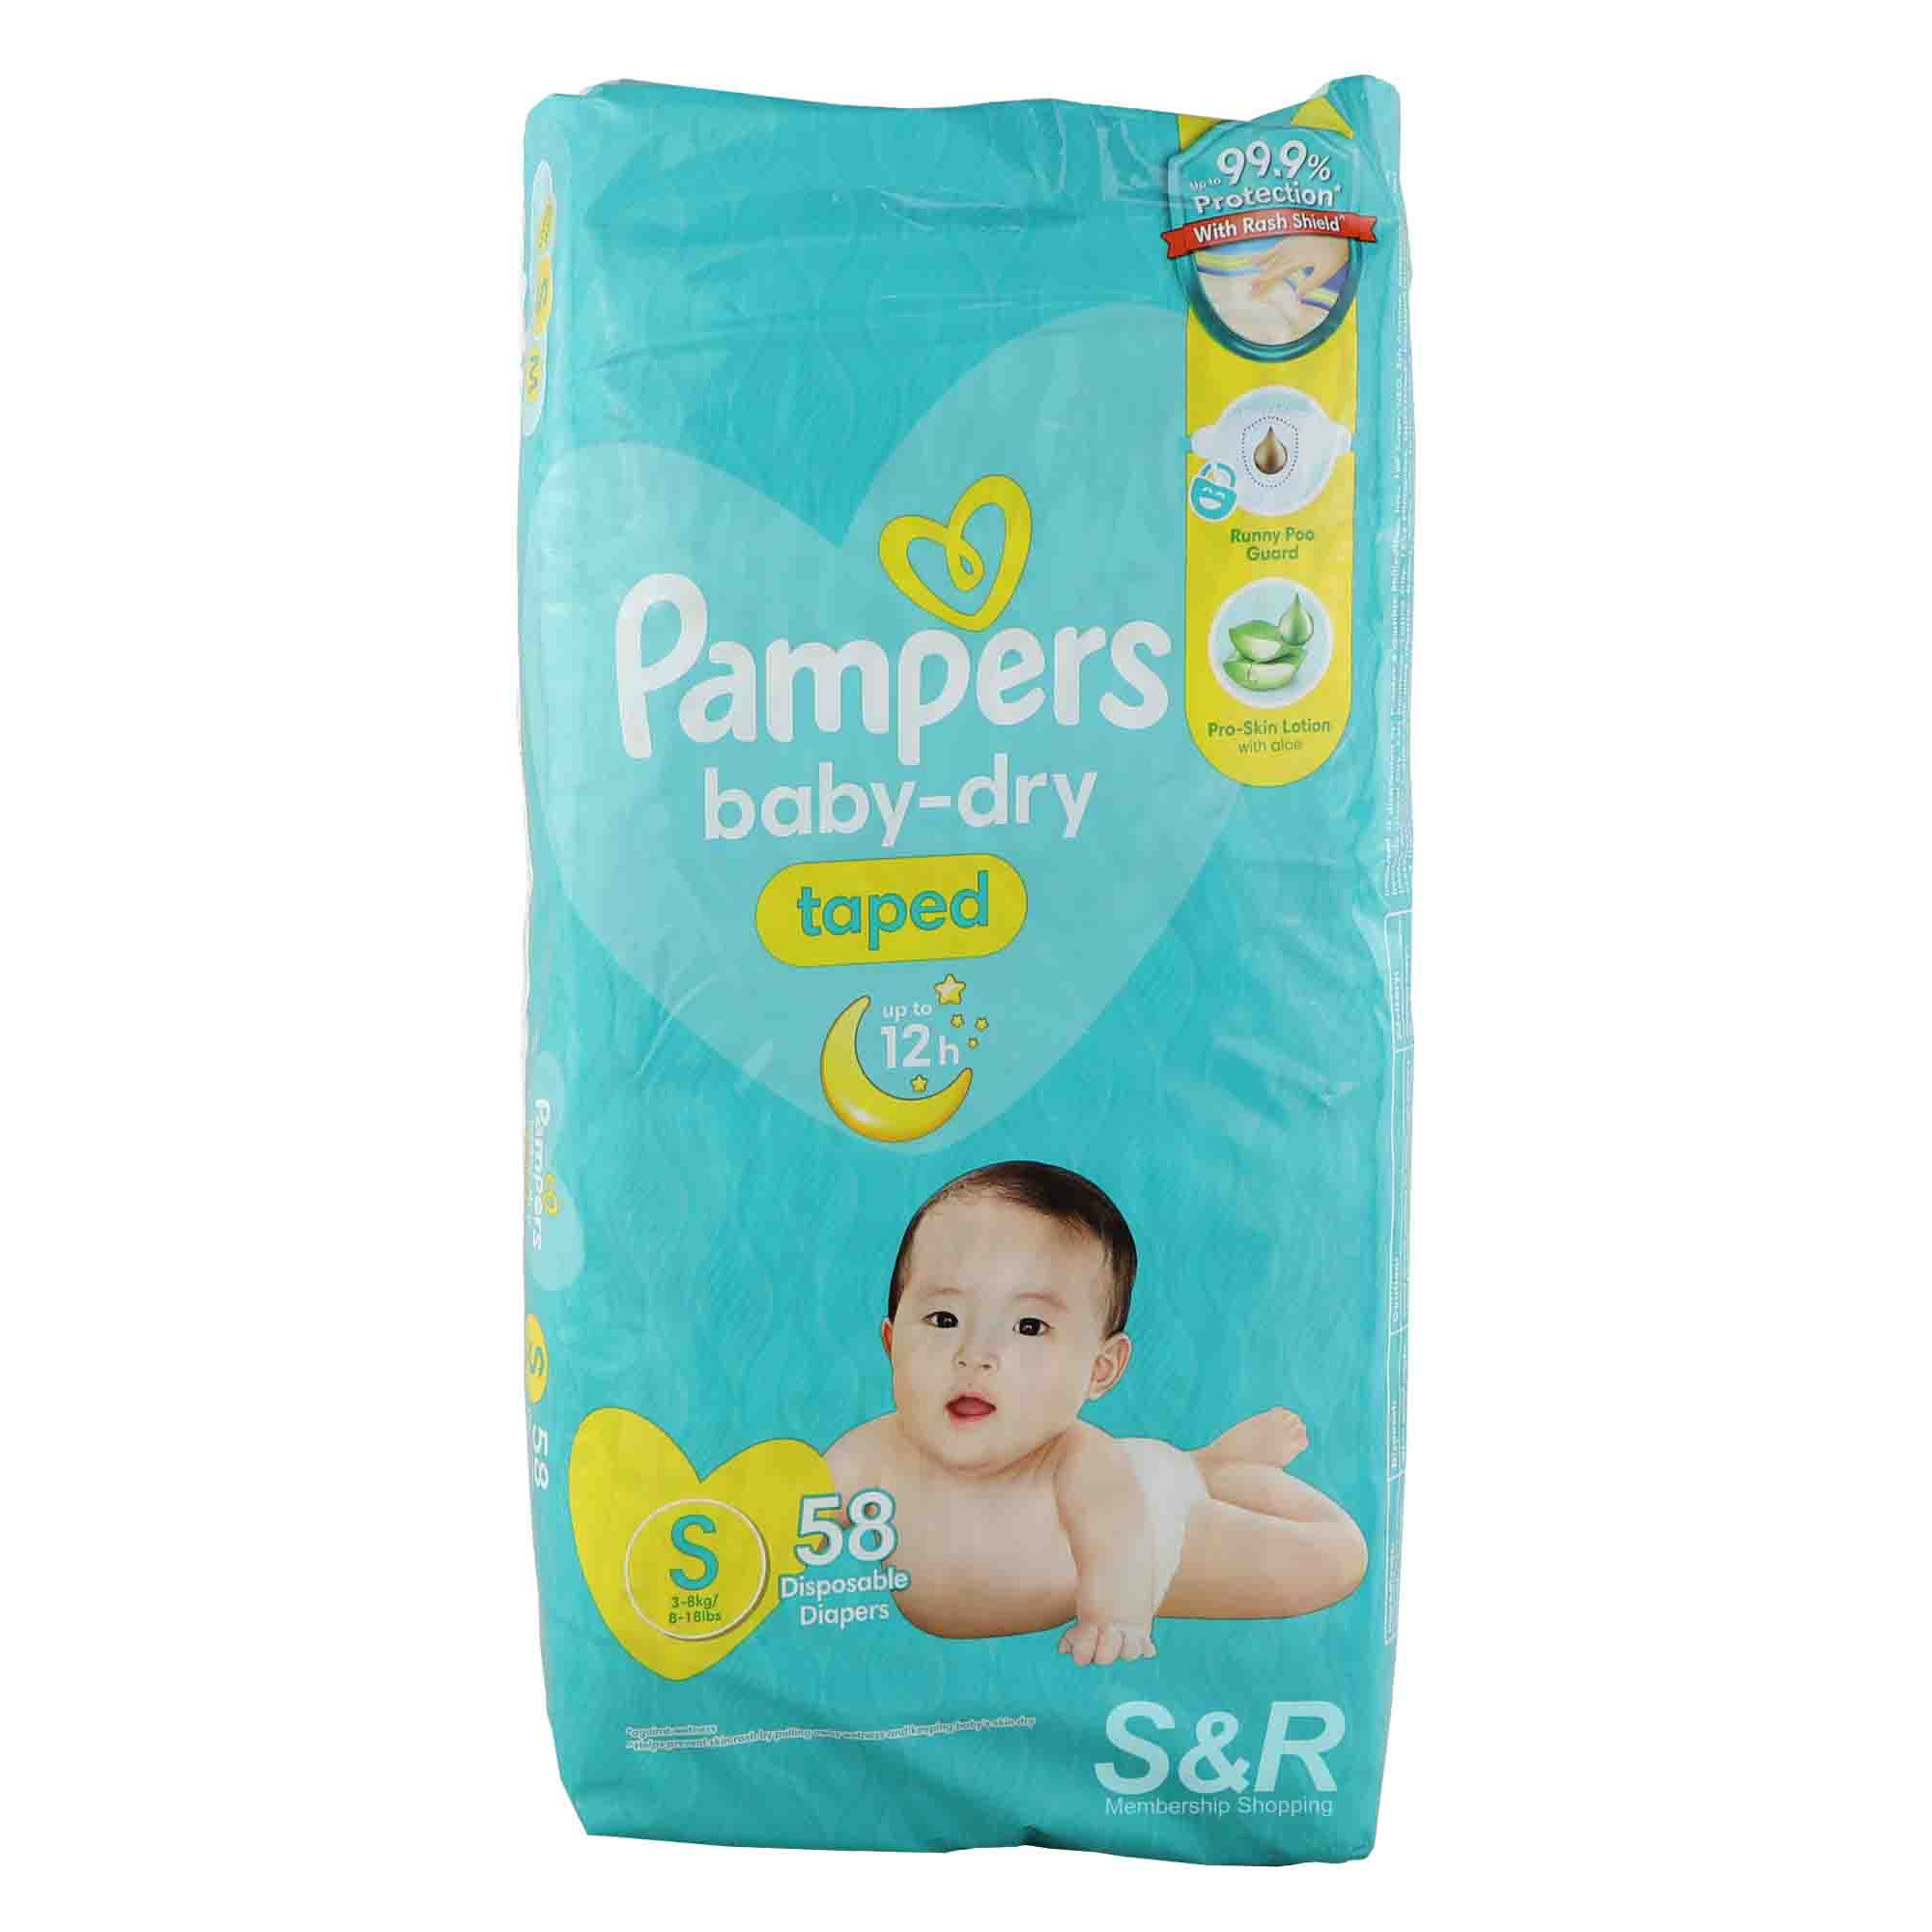 Pampers Baby Dry Diapers Taped Small 58pcs